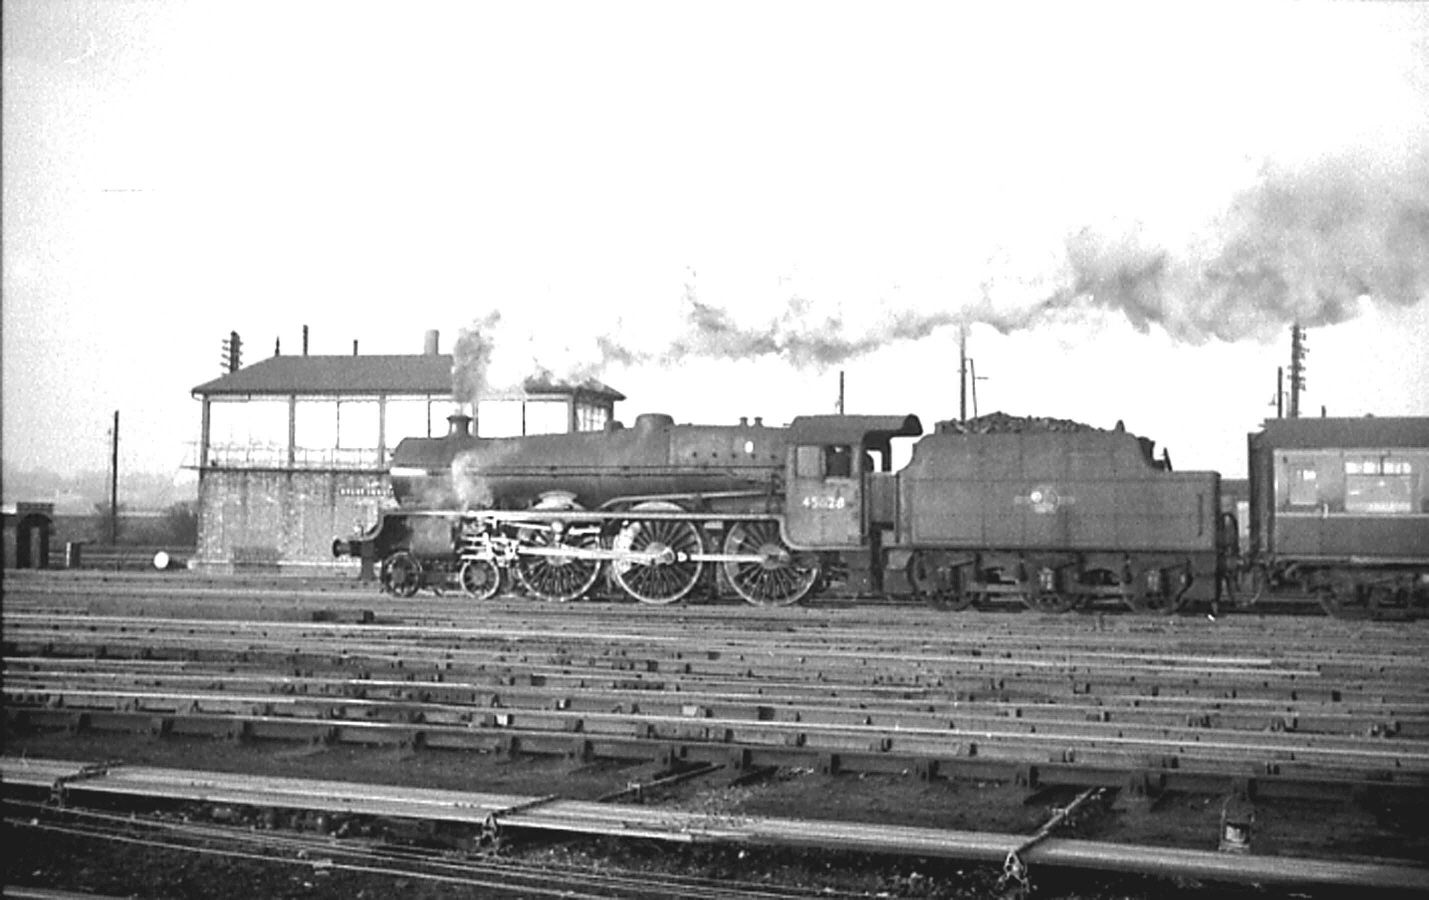 45628 Somaliland at Brent (Cricklewood) in 1962